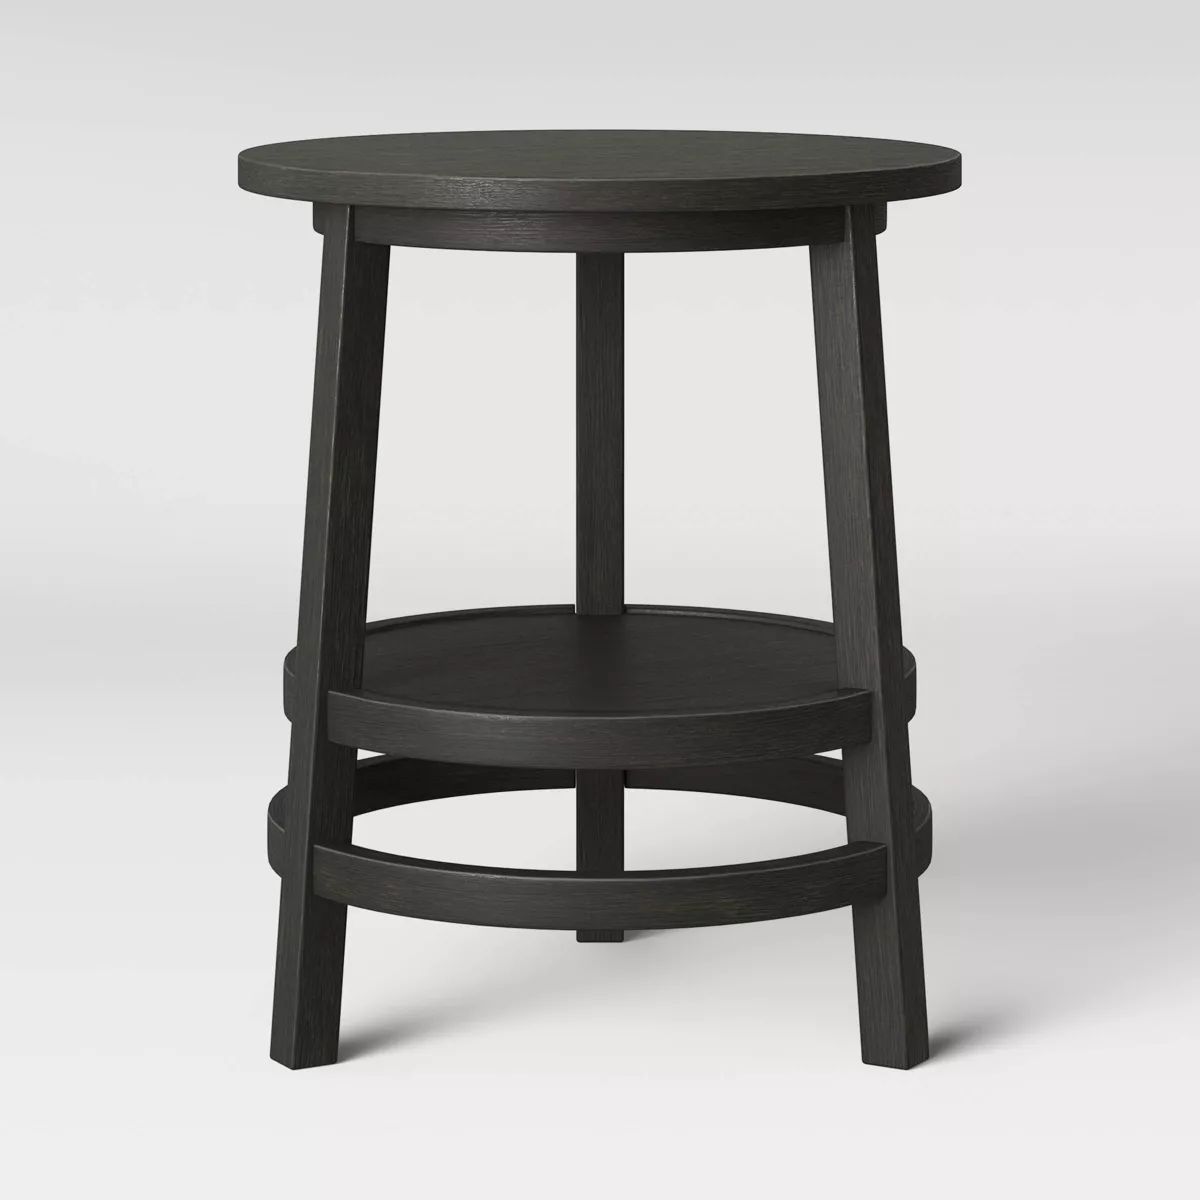 Haverhill Round Wood End Table - Threshold™ | Target